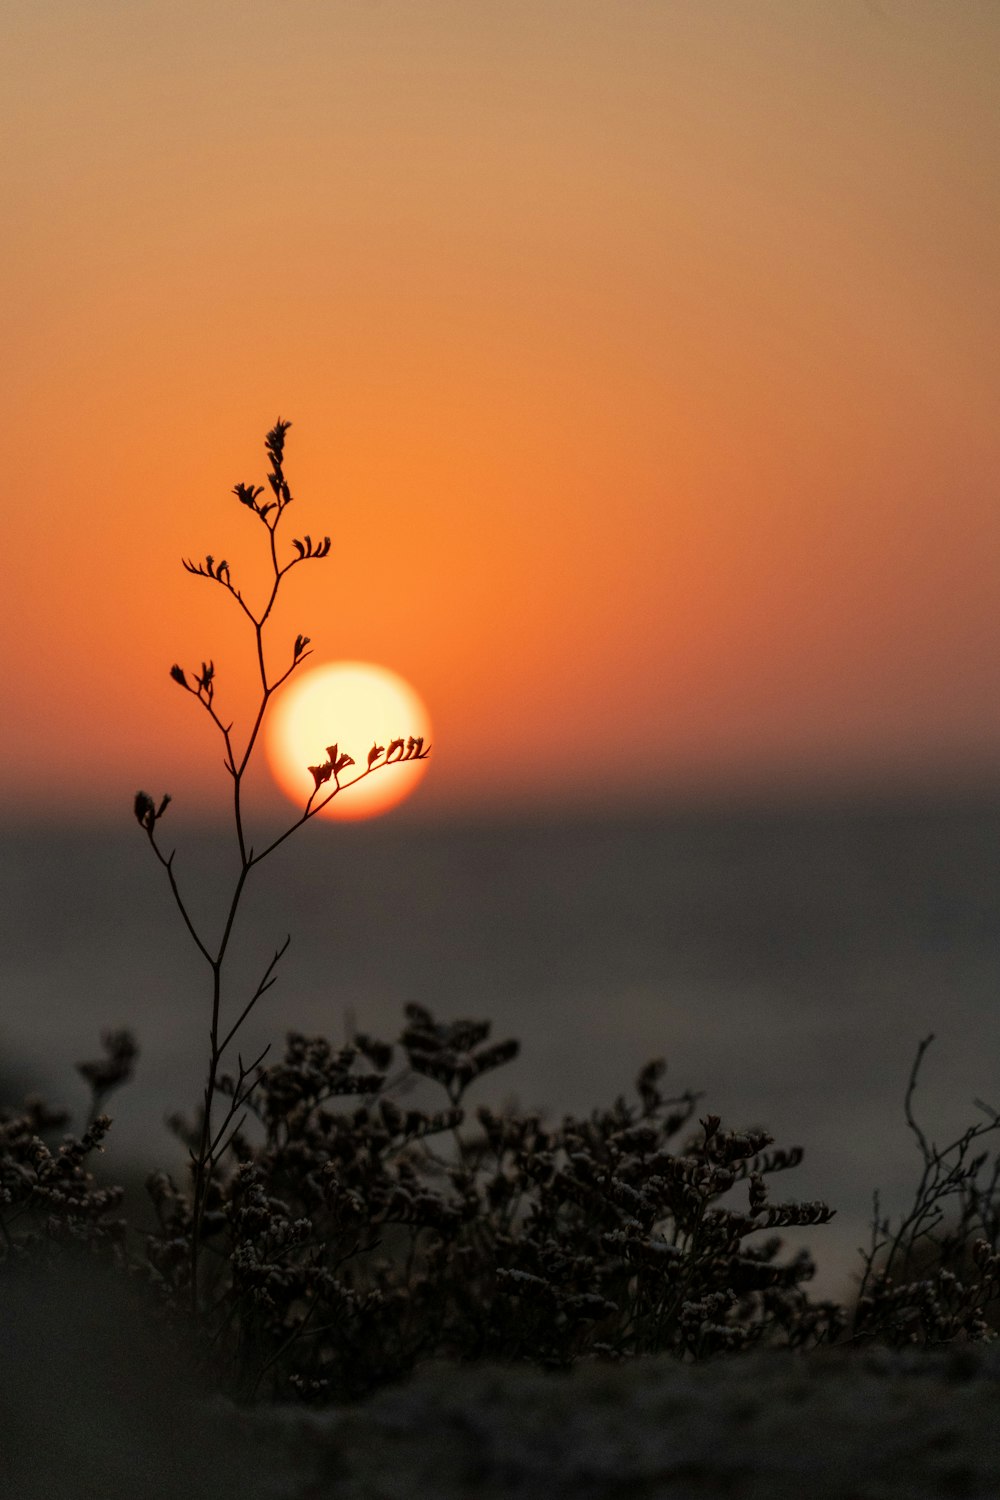 the sun is setting over the ocean with a plant in the foreground